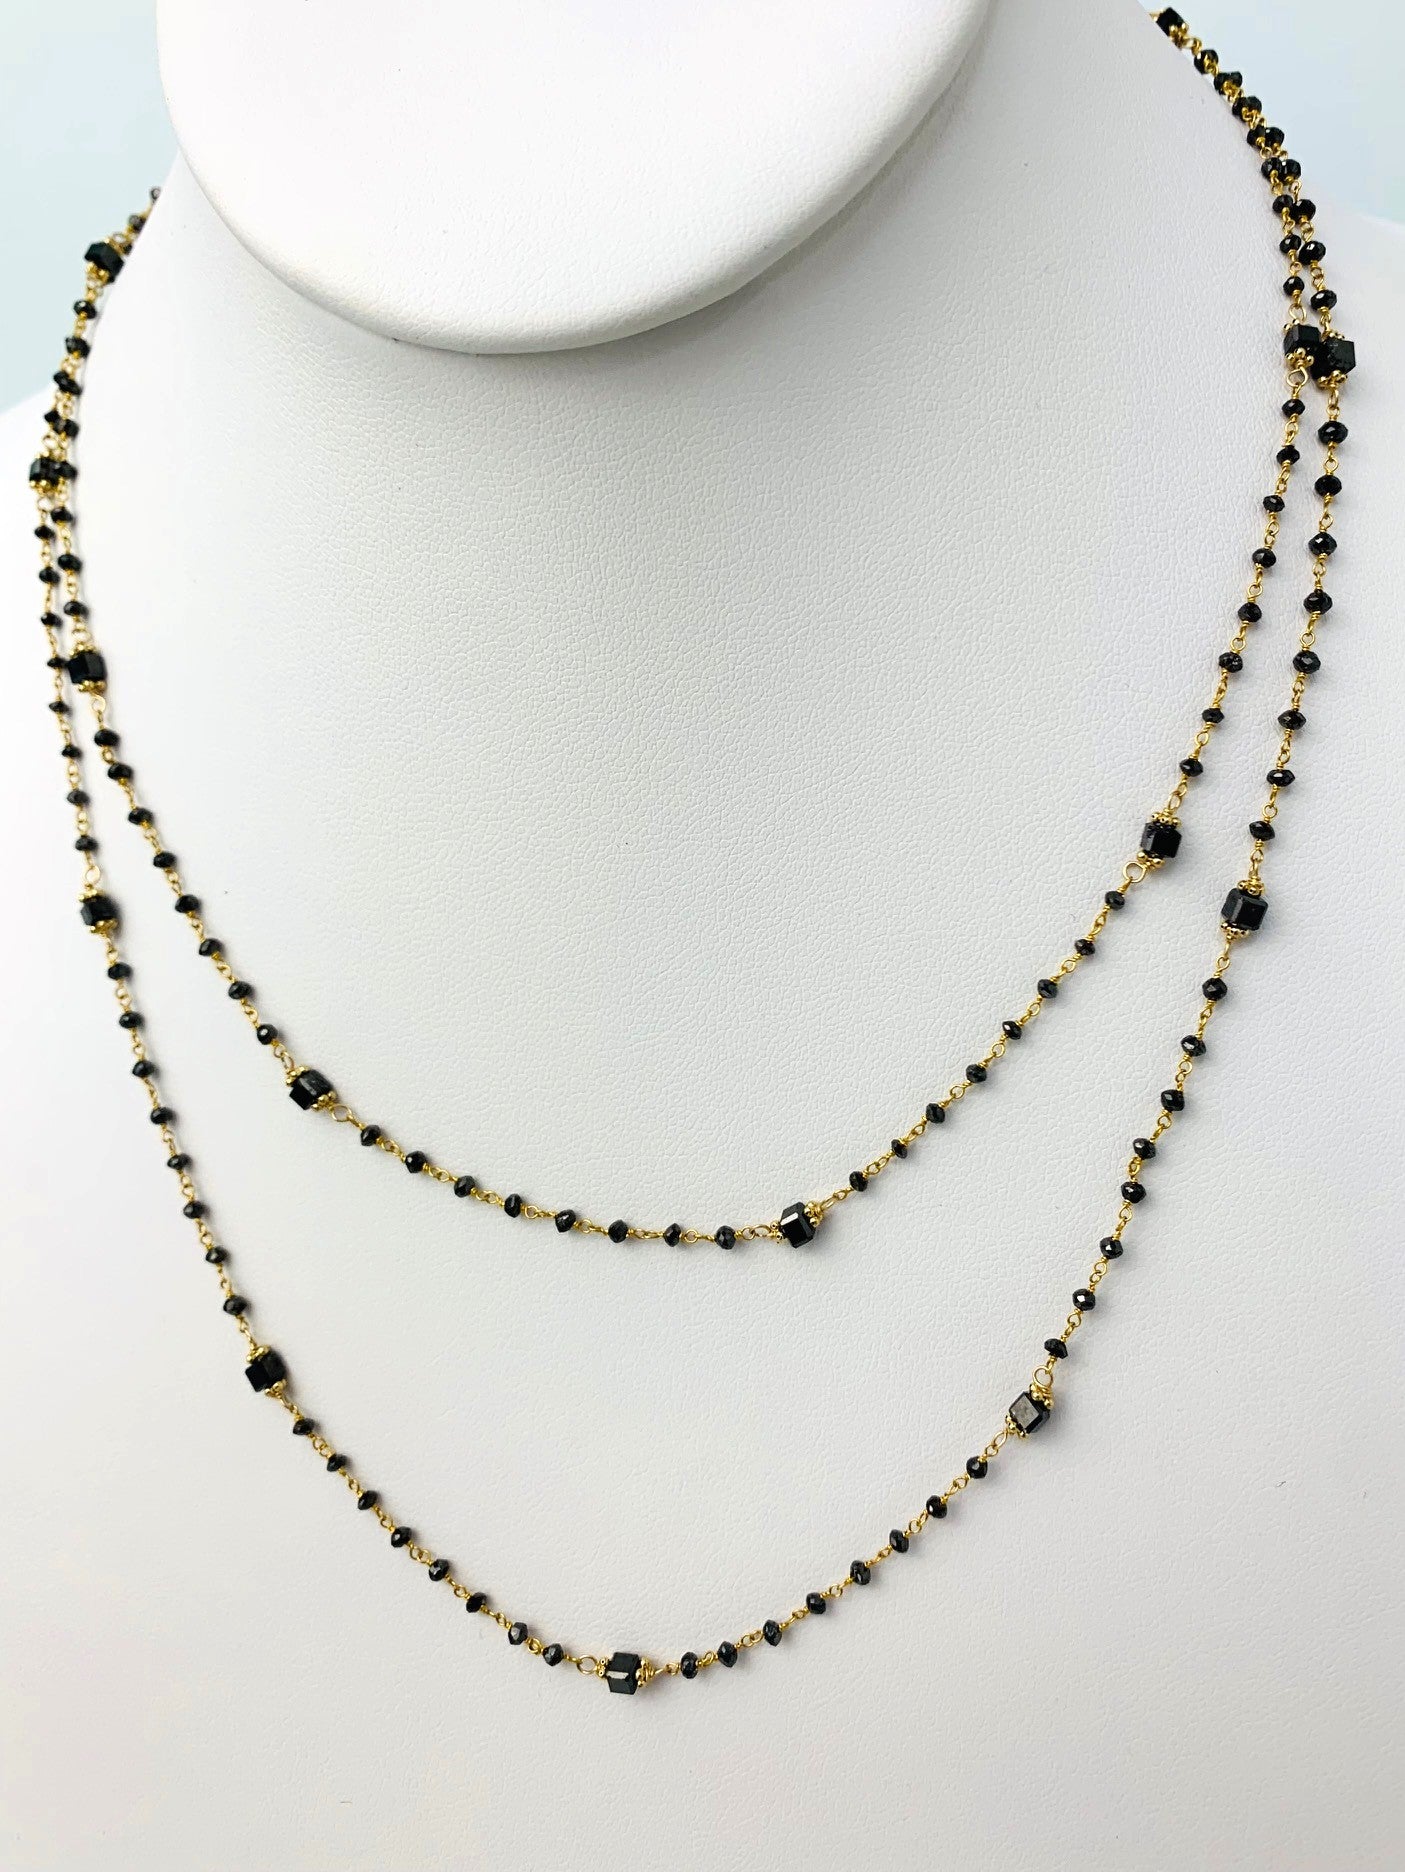 37" Black Diamond Rosary Necklace With Cube Diamond Accents in 14KY - NCK-271-ROSDIA14Y-BK-37A